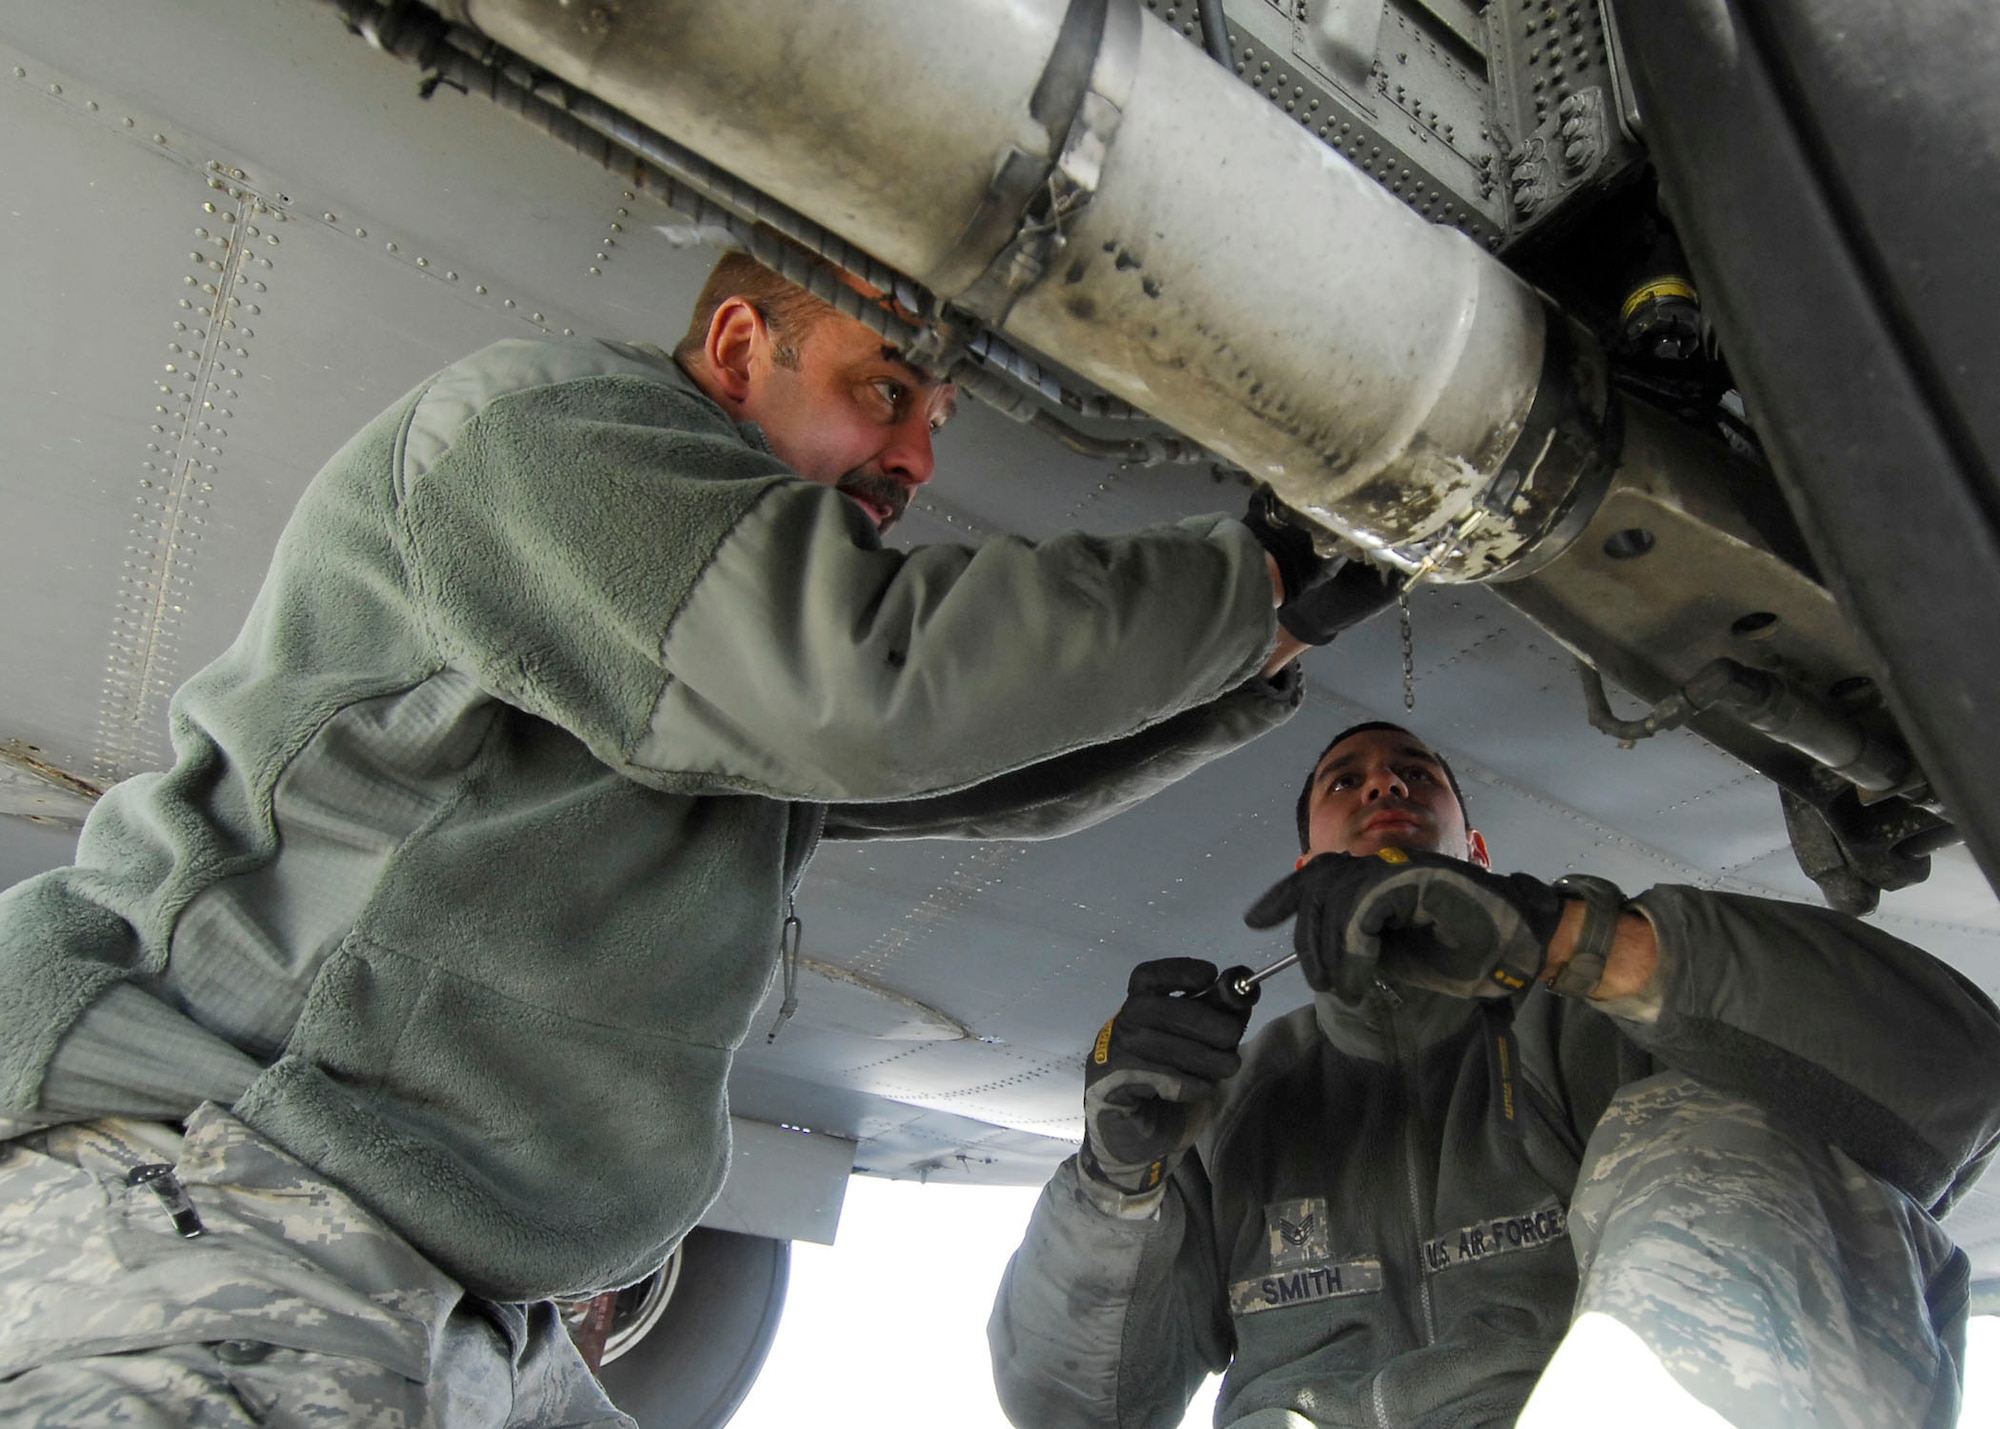 BAGRAM AIRFIELD, Afghanistan -- Master Sgt. Jim Kocijanski (left) assists Tech. Sgt. Mike Smith (right) while performing landing gear maintenance on a C-130 Hercules, Dec. 7, 2009.  During an inspection on the aircraft the Airmen found a problem with the landing gear which they immediately fixed to keep the aircraft on time for future missions.  Both Airmen, crew chiefs from the 455th Expeditionary Aircraft Maintenance Squadron, are deployed from the Nevada Air National Guard's 152nd Airlift Wing and hail from Reno, Nev.  (U.S. Air Force photo/Senior Airman Felicia Juenke)